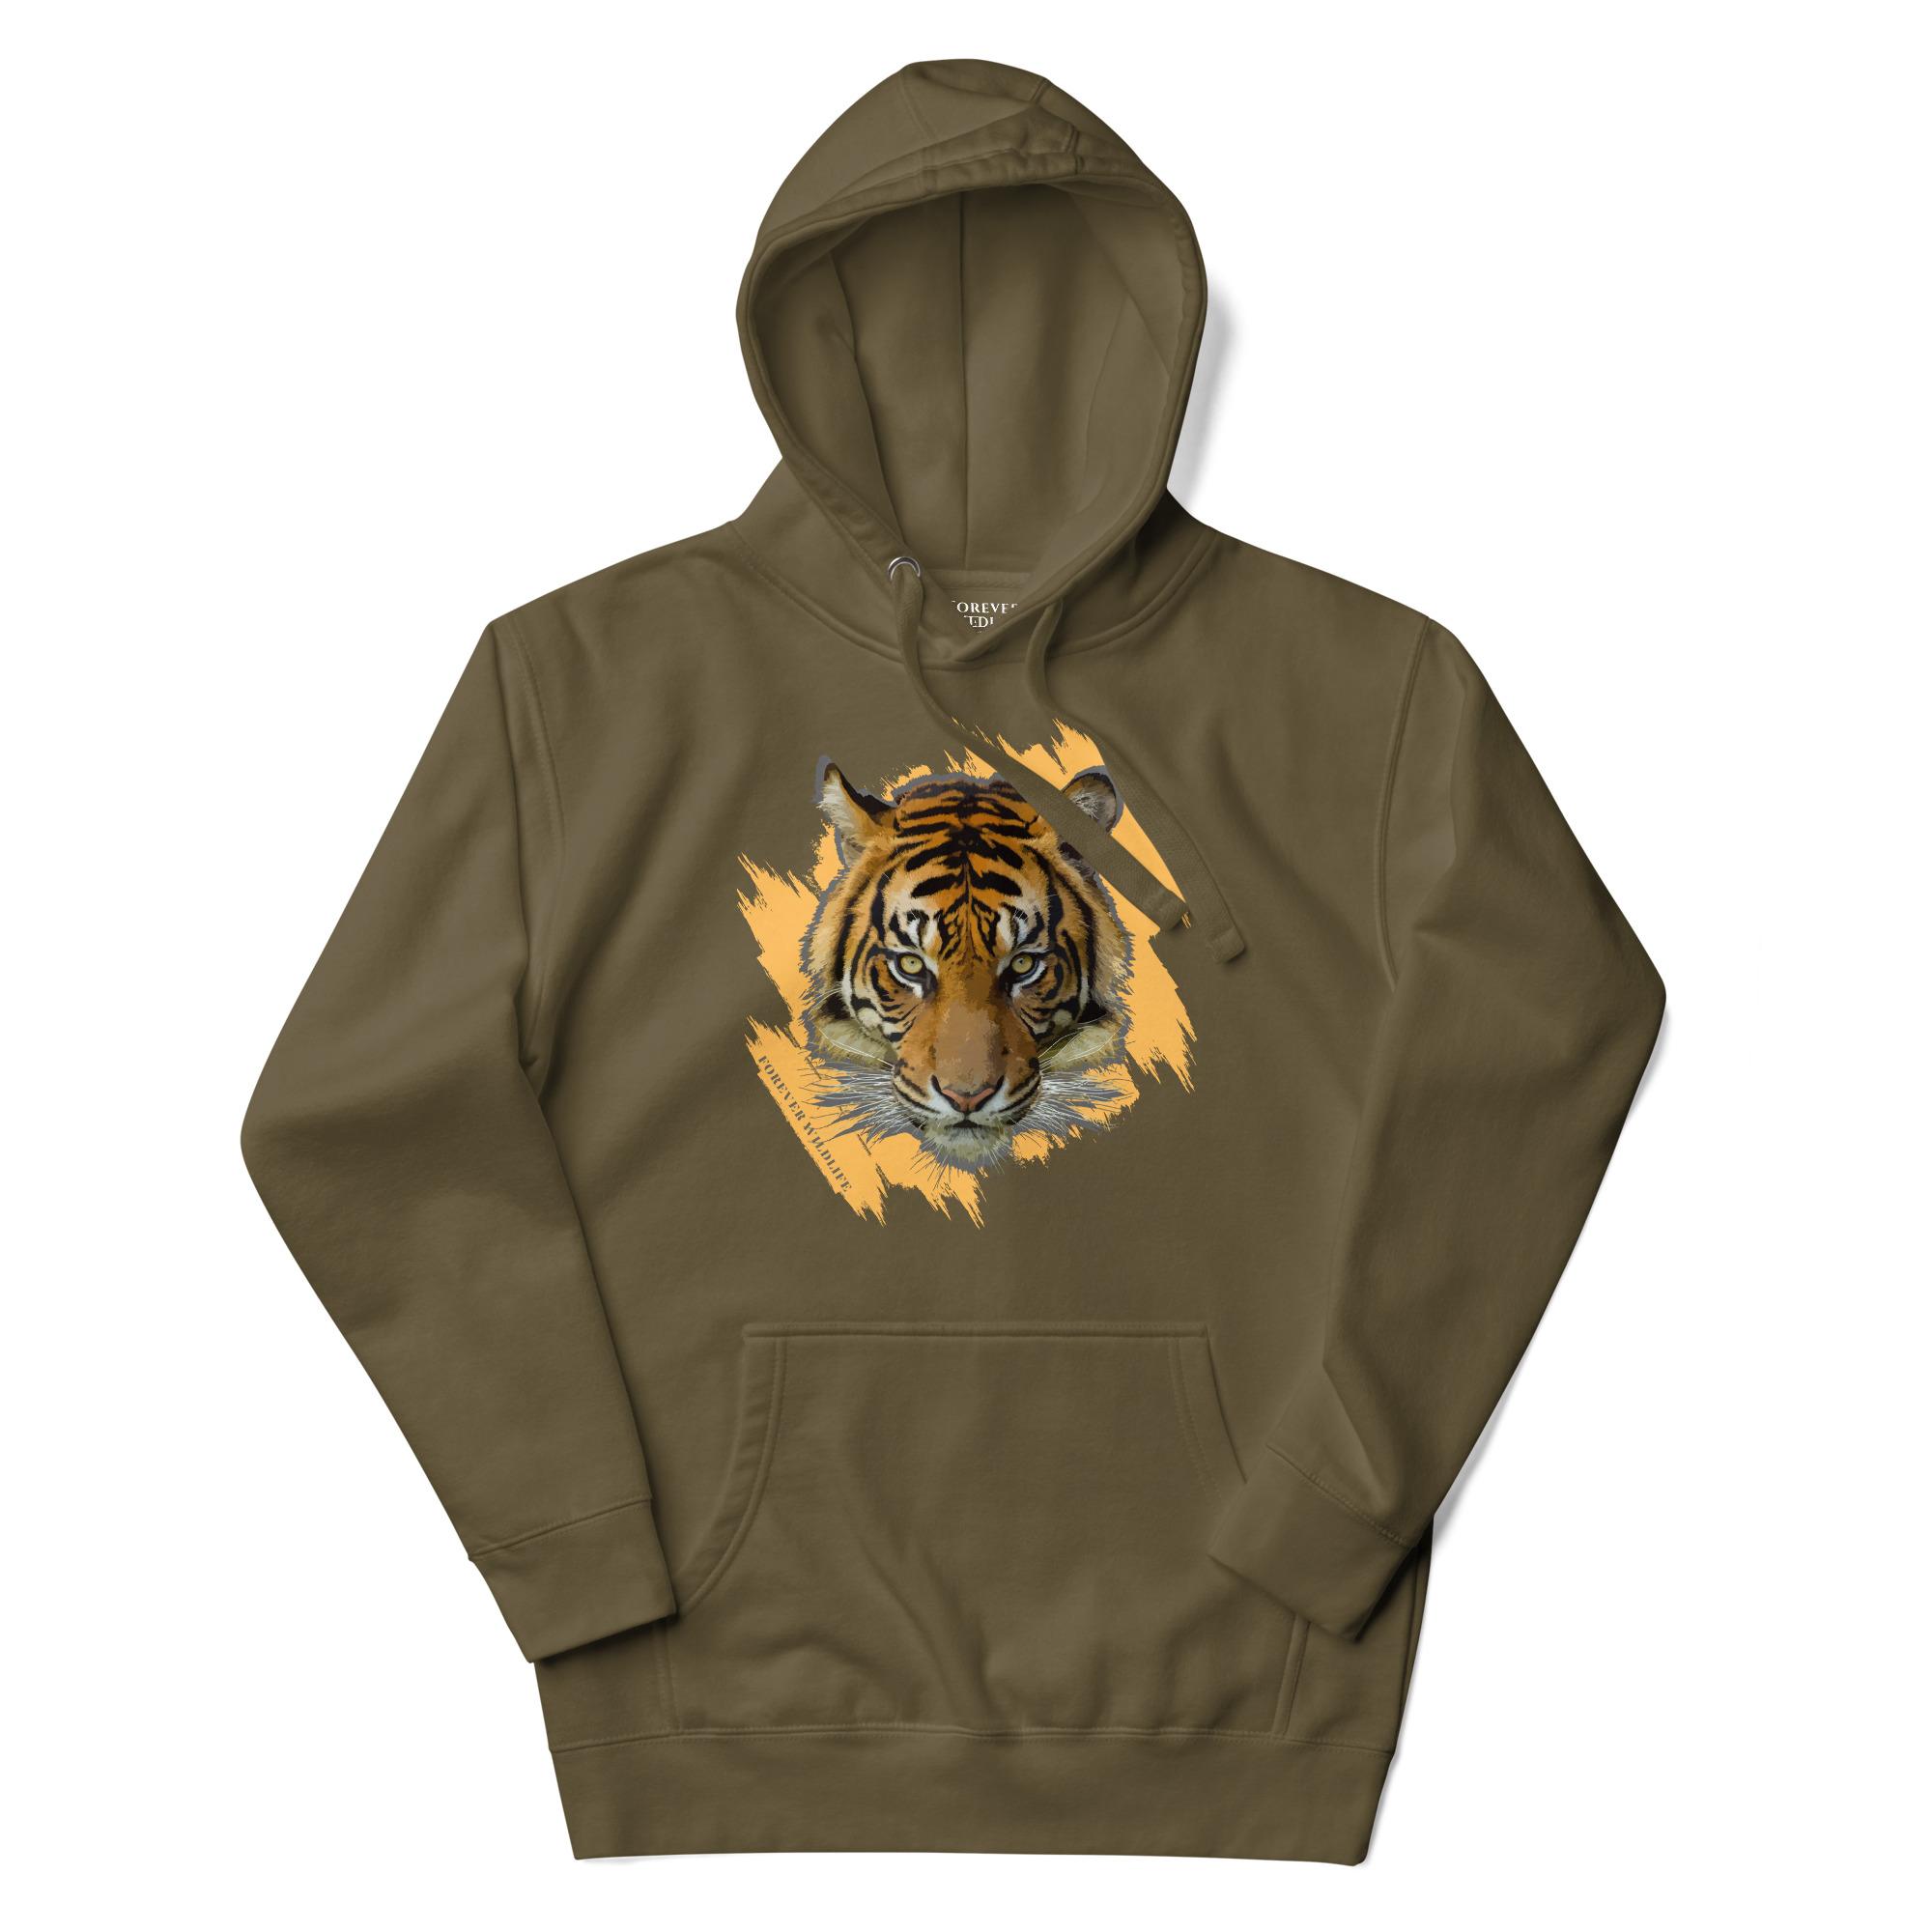 Tiger Face Hoodie in Military Green – Premium Wildlife Animal Inspirational Hoodie Design, part of Wildlife Hoodies & Clothing from Forever Wildlife